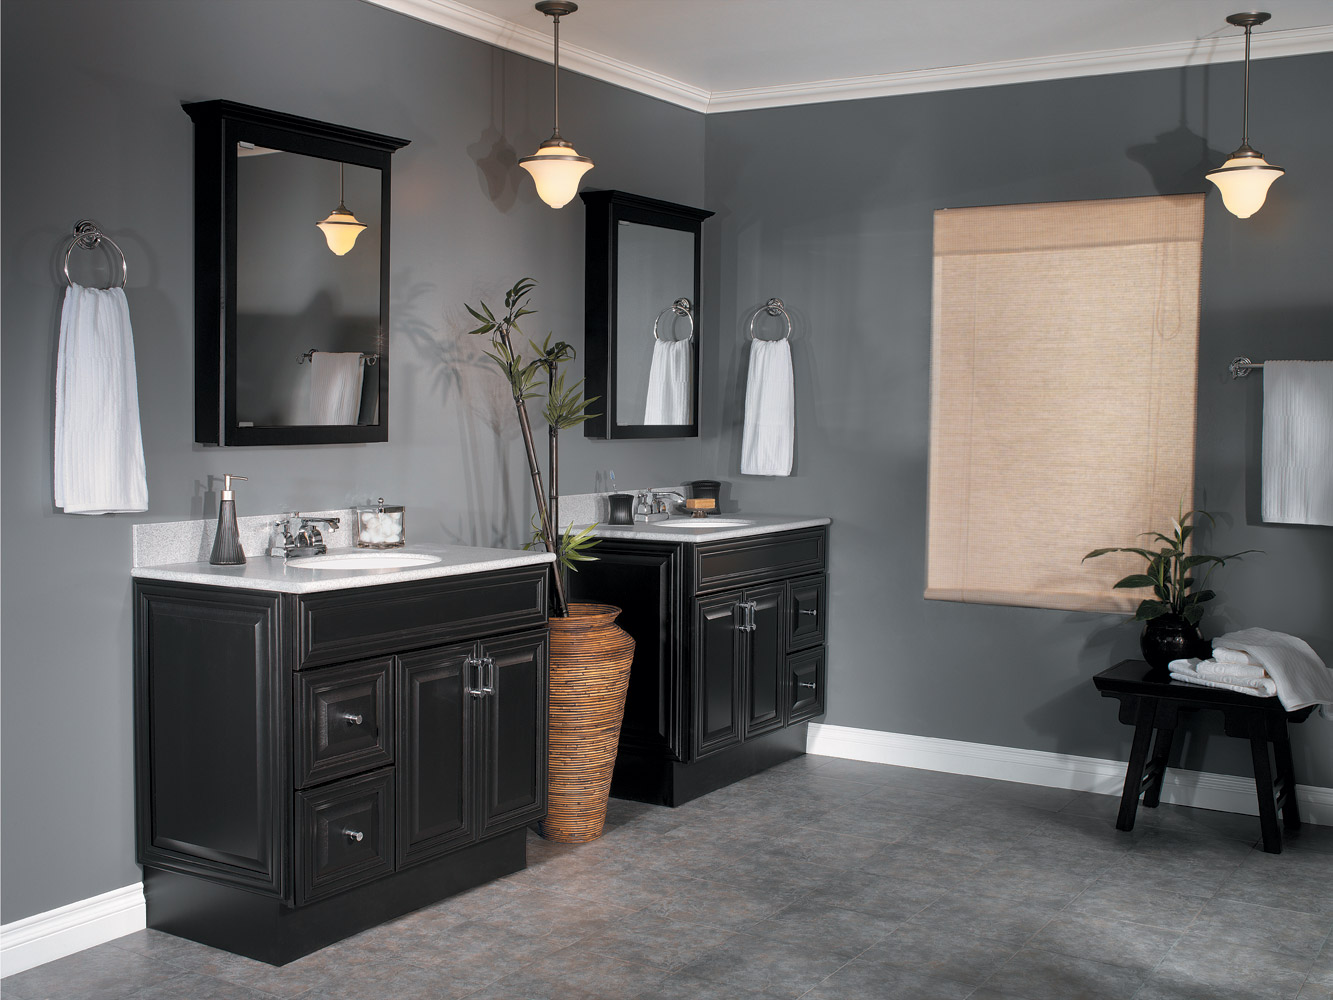 Twin Bathroom Completed Traditional Twin Bathroom Vanity Design Completed With Small Traditional Bathroom Pendant Lighting Decoration Ideas Bathroom Bathroom Pendant Lighting Fixtures With A Controllable Light Intensity With Your Shades